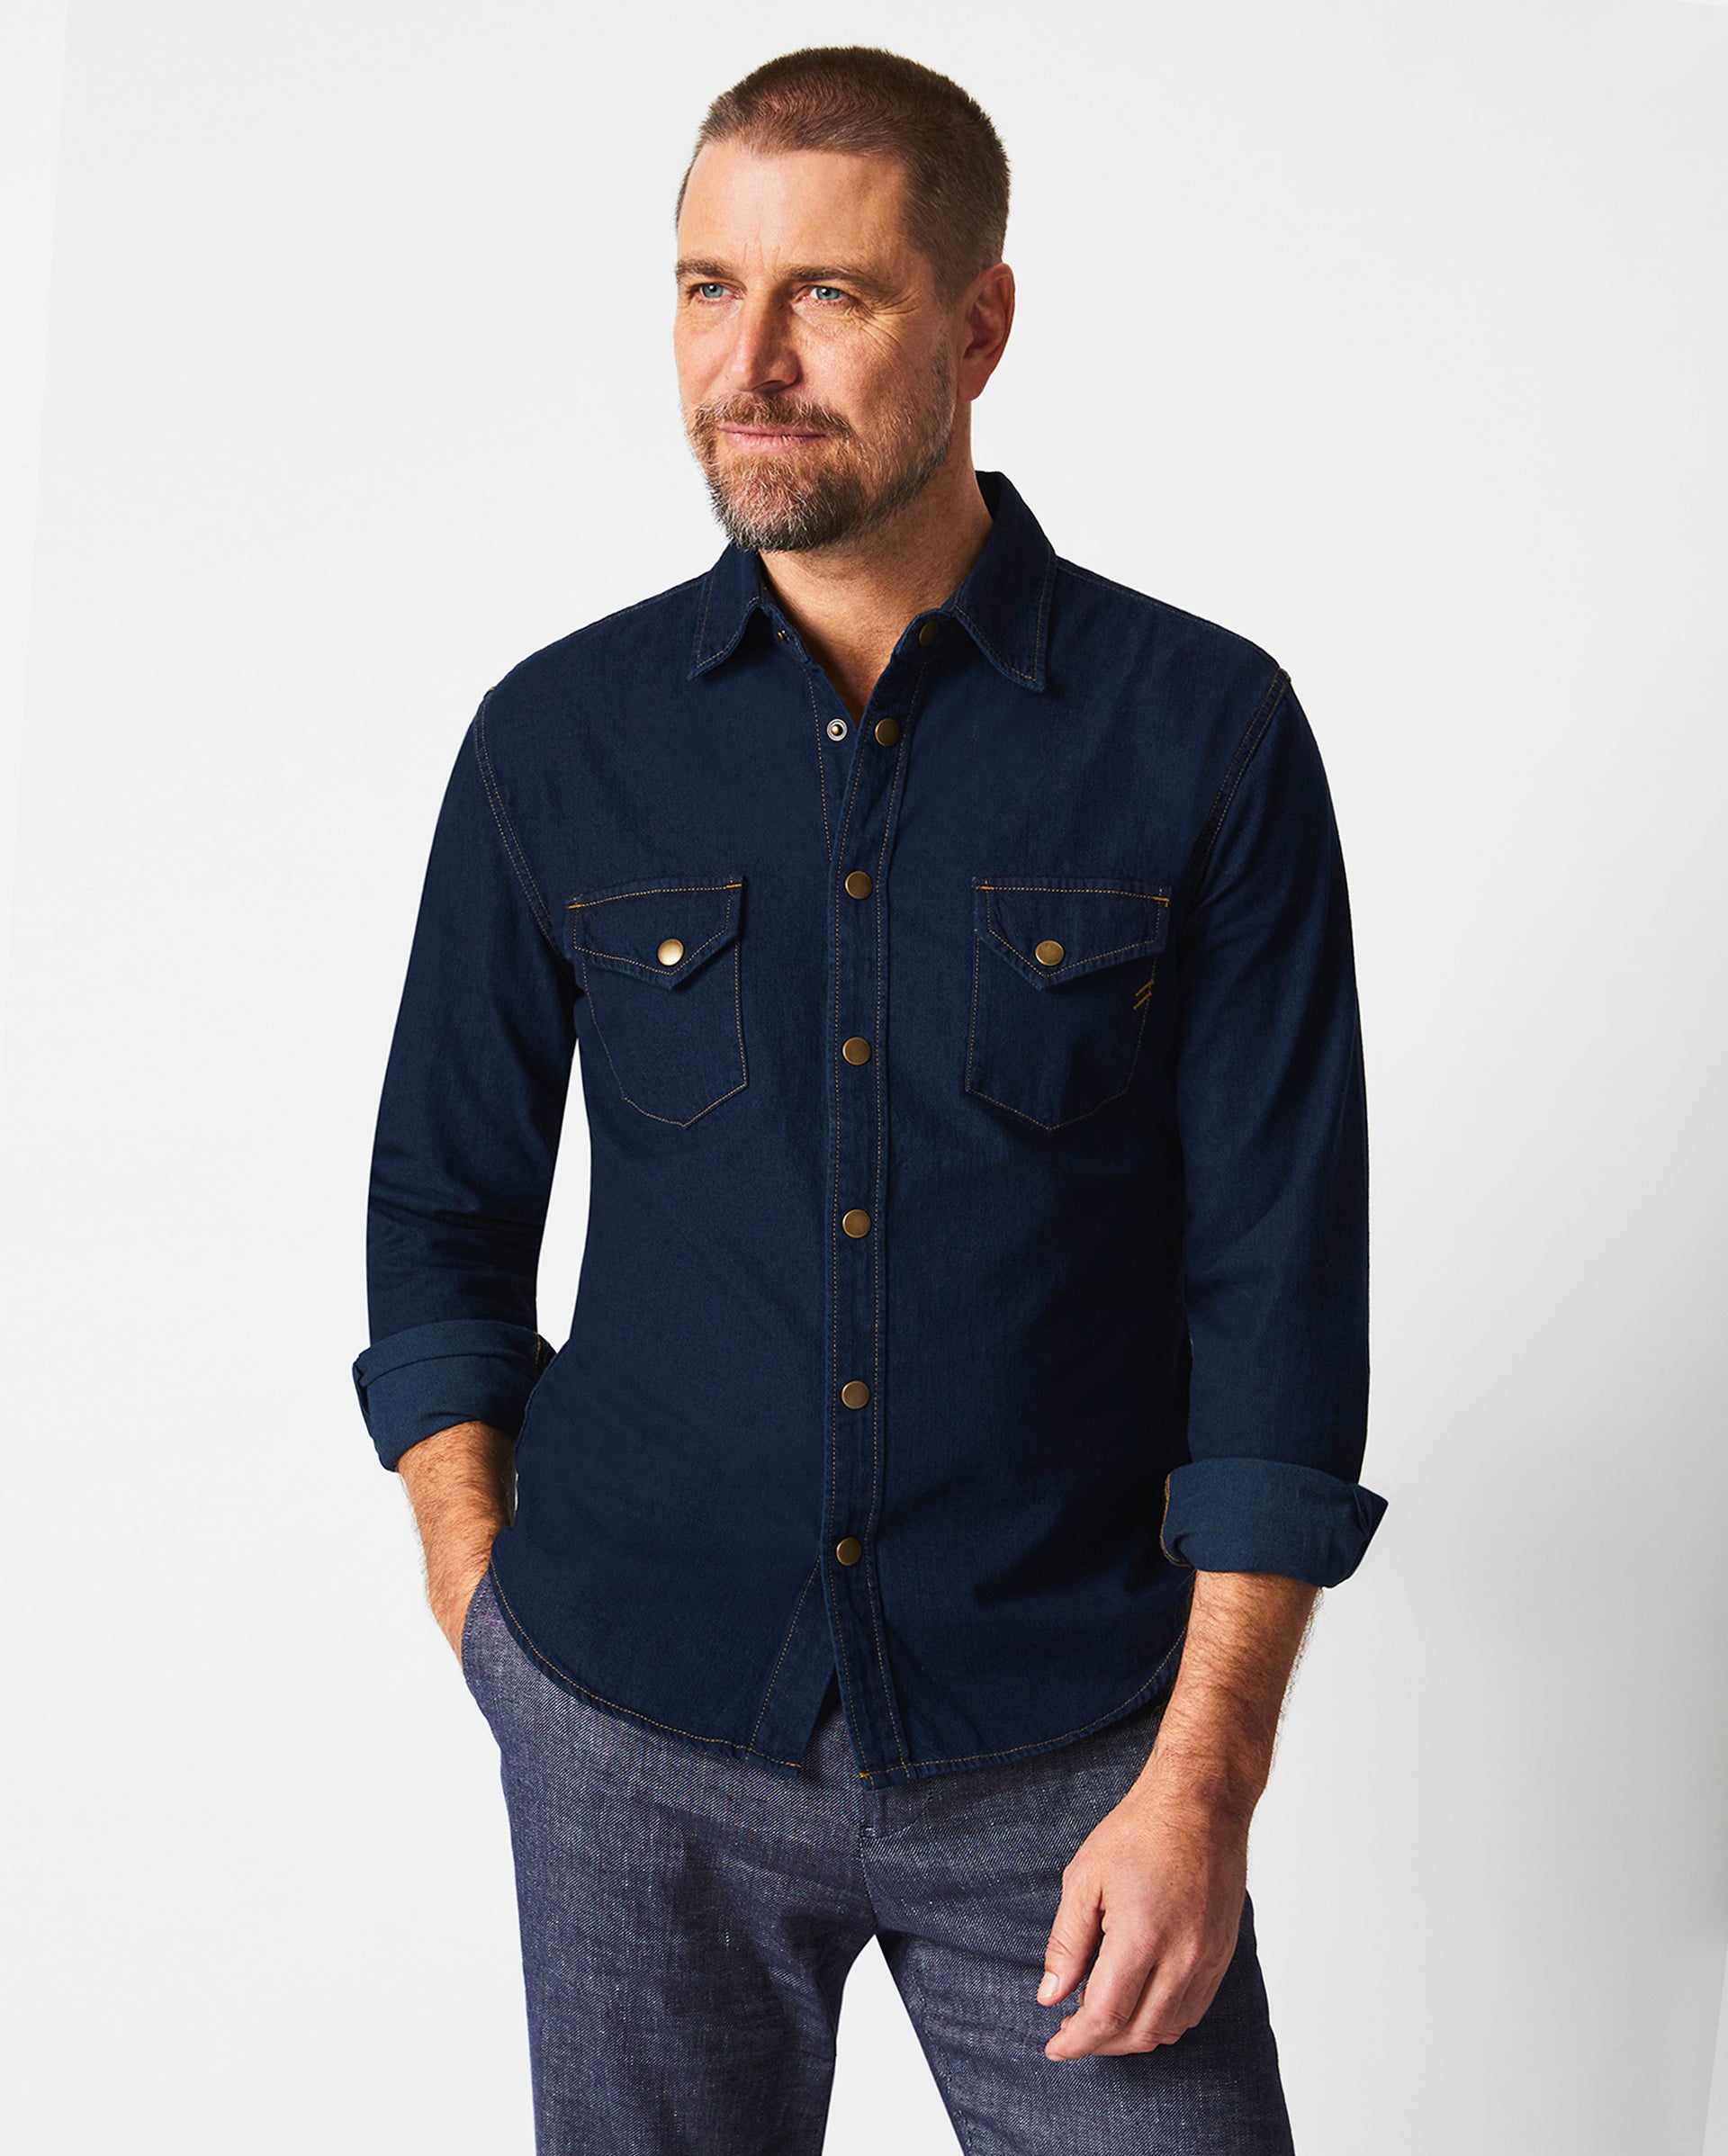 Kant Structured Slim Fit Shirt with Buttoned Flap Pockets